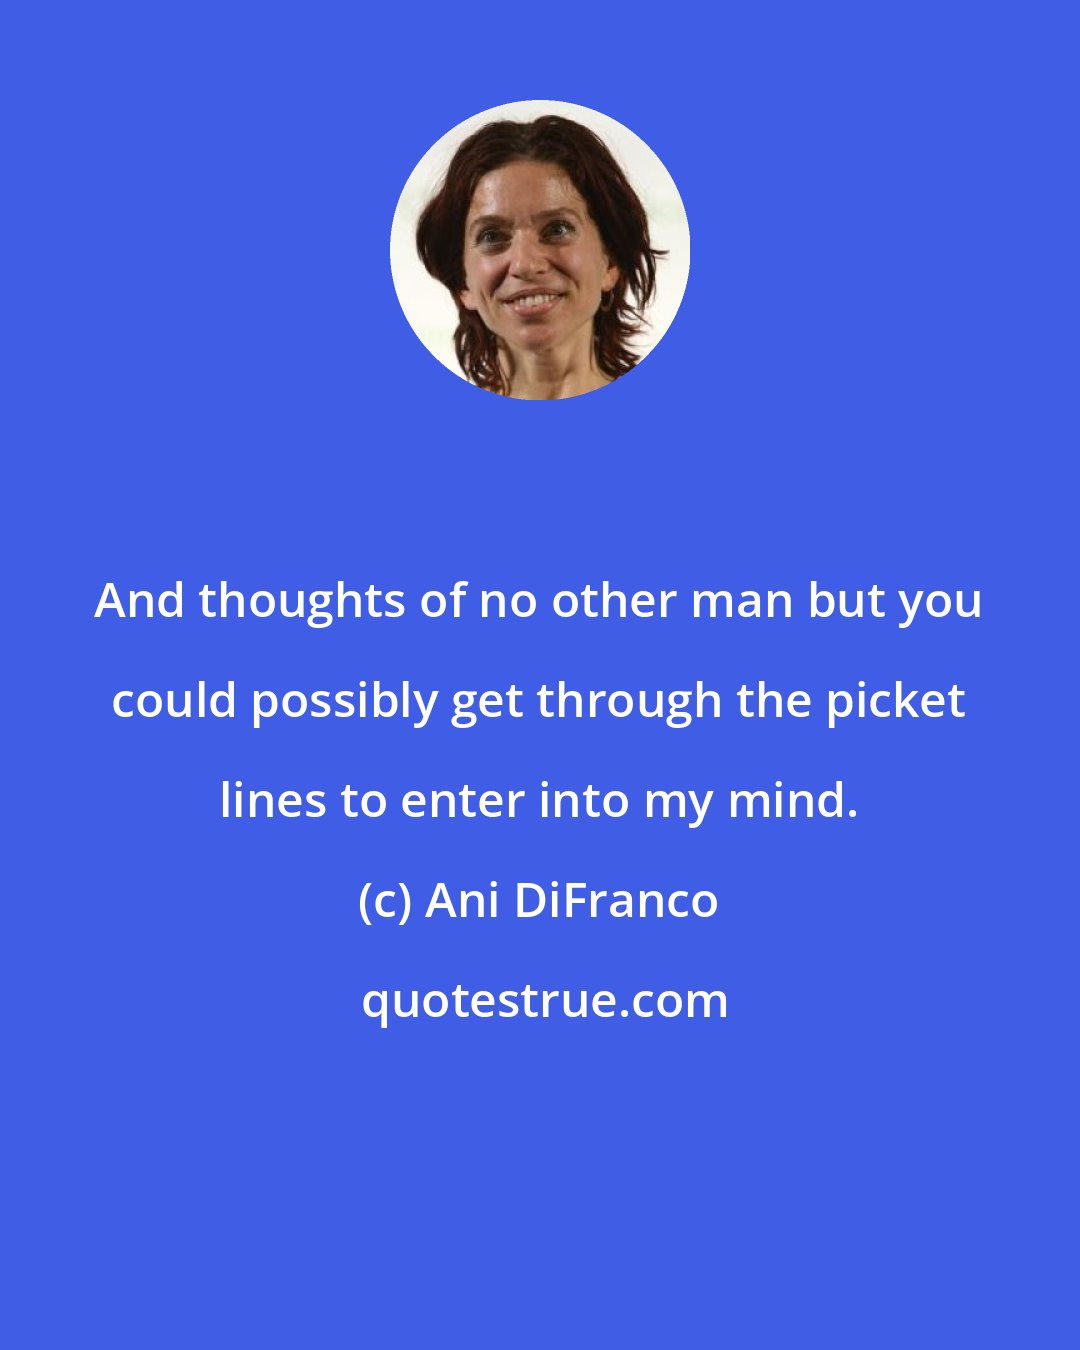 Ani DiFranco: And thoughts of no other man but you could possibly get through the picket lines to enter into my mind.